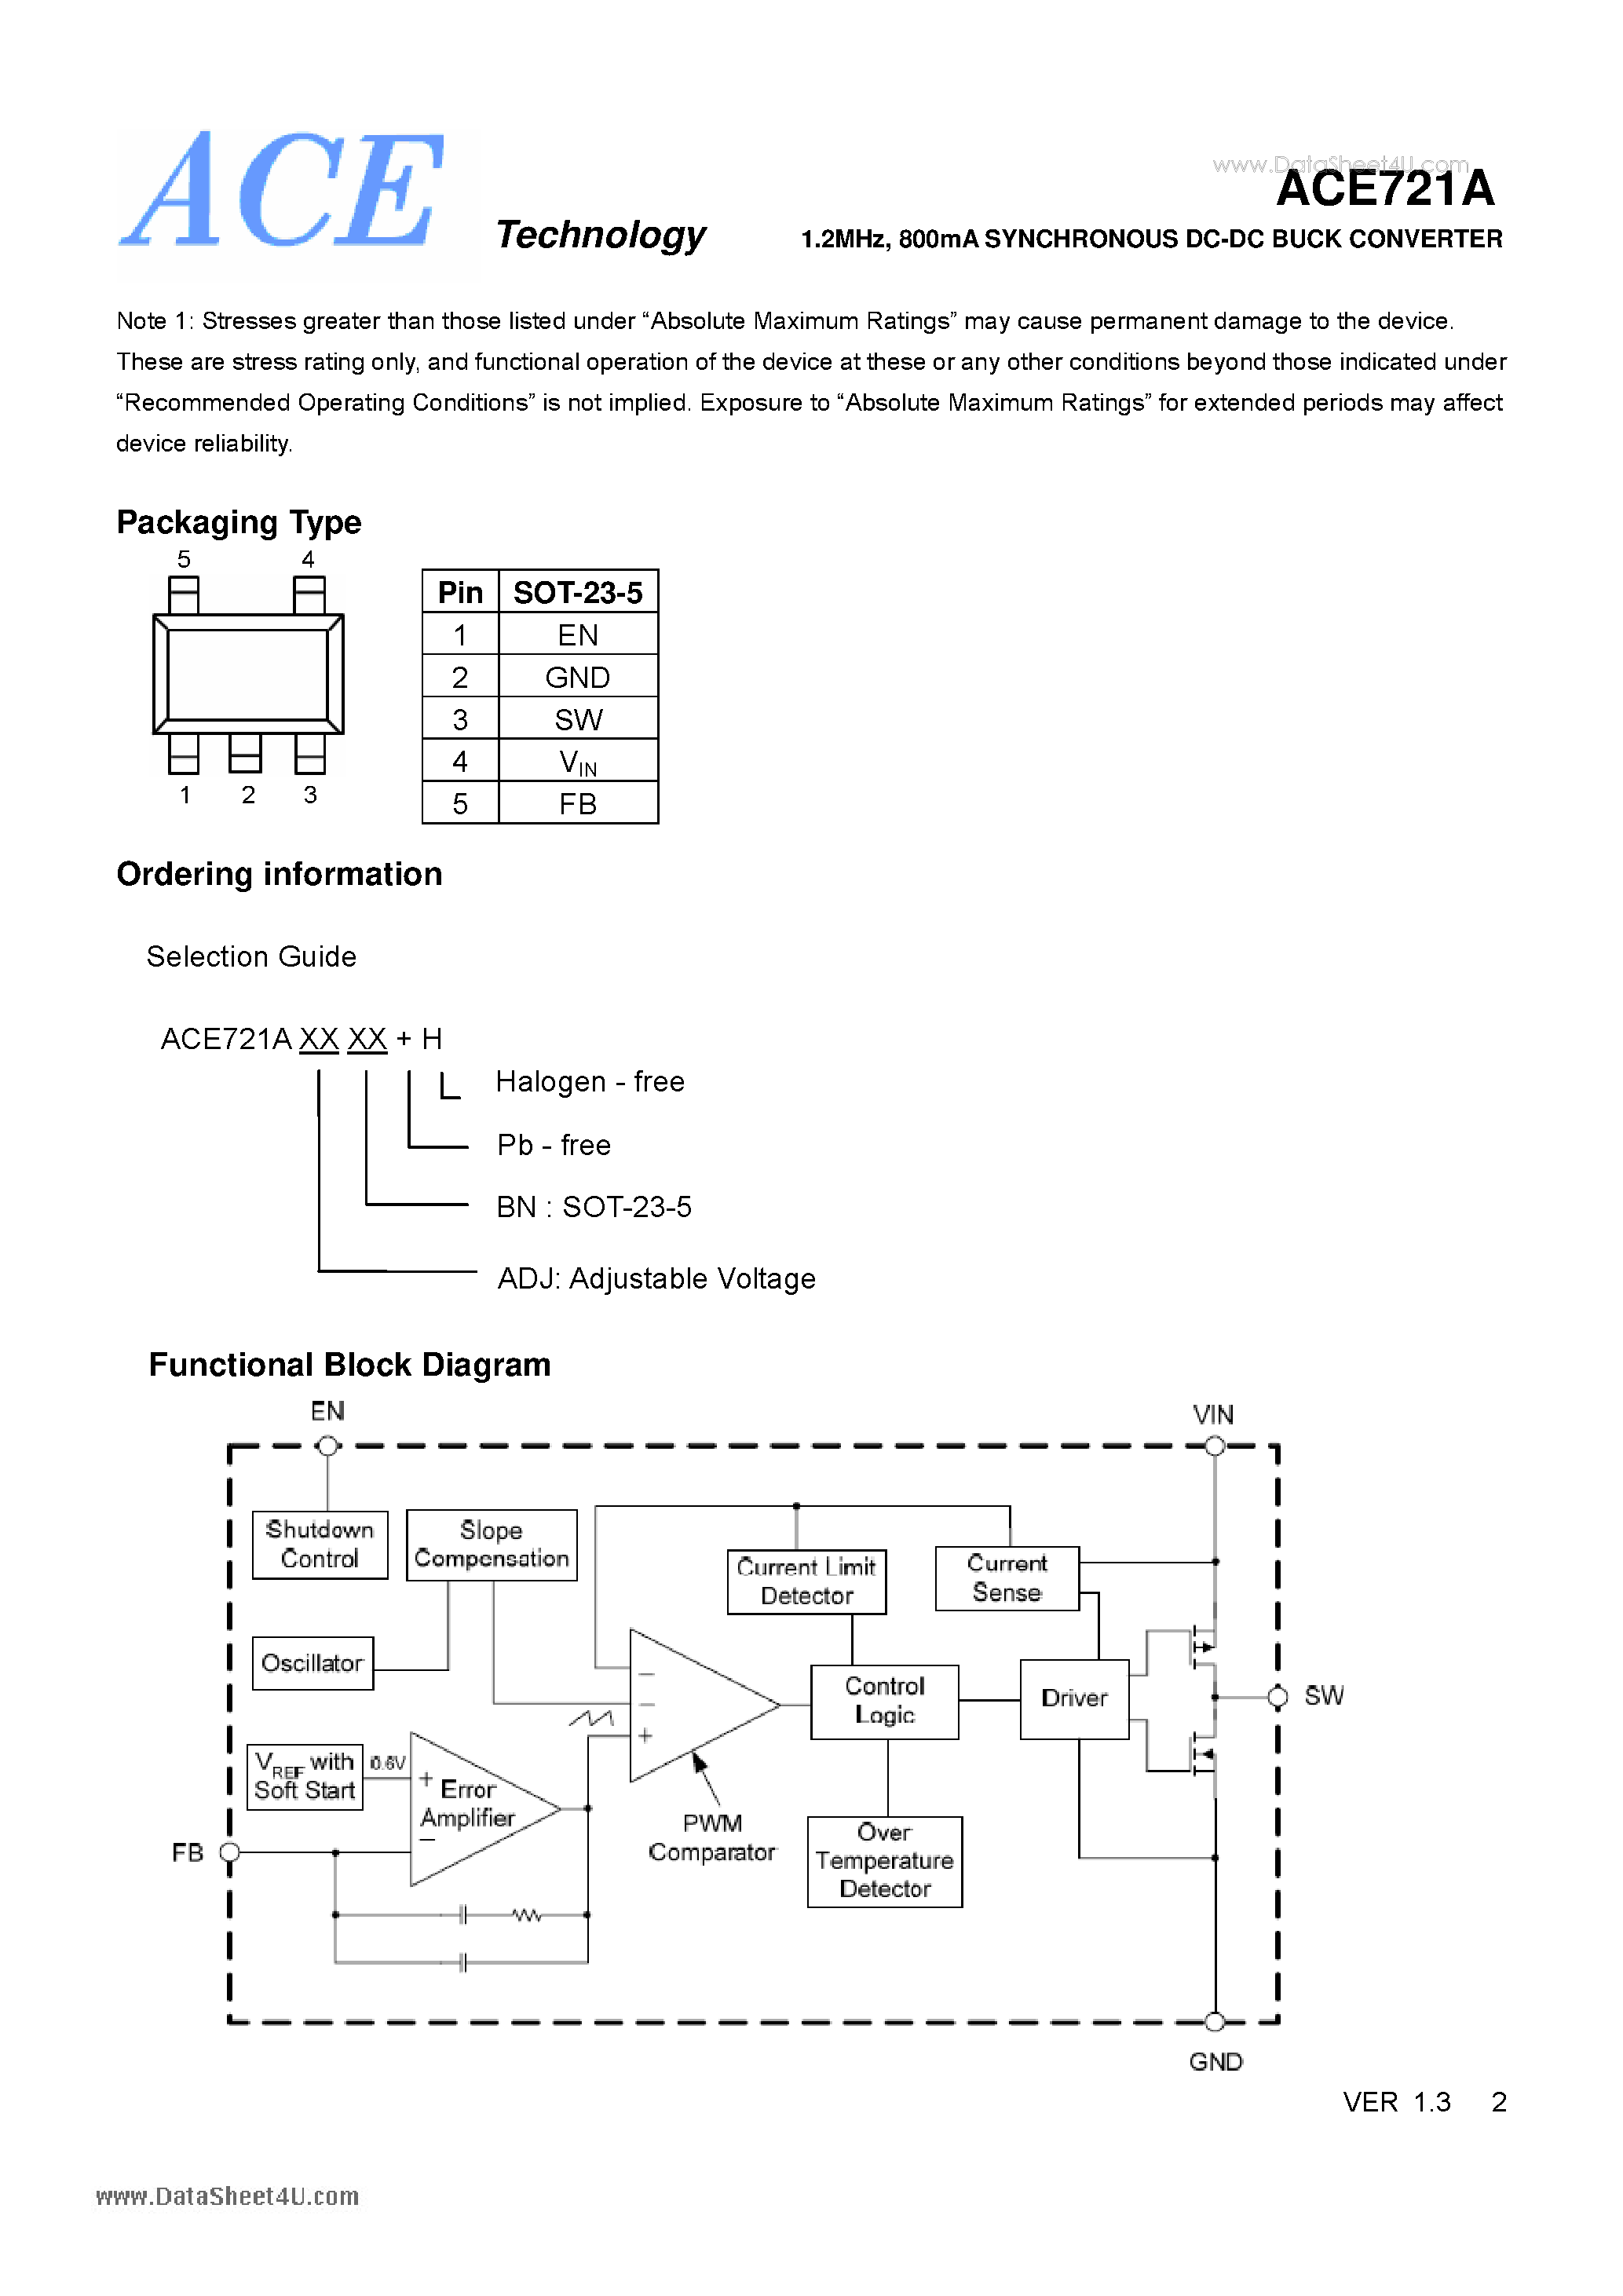 Datasheet ACE721A - 1.2MHz 800mA SYNCHRONOUS DC-DC BUCK CONVERTER page 2